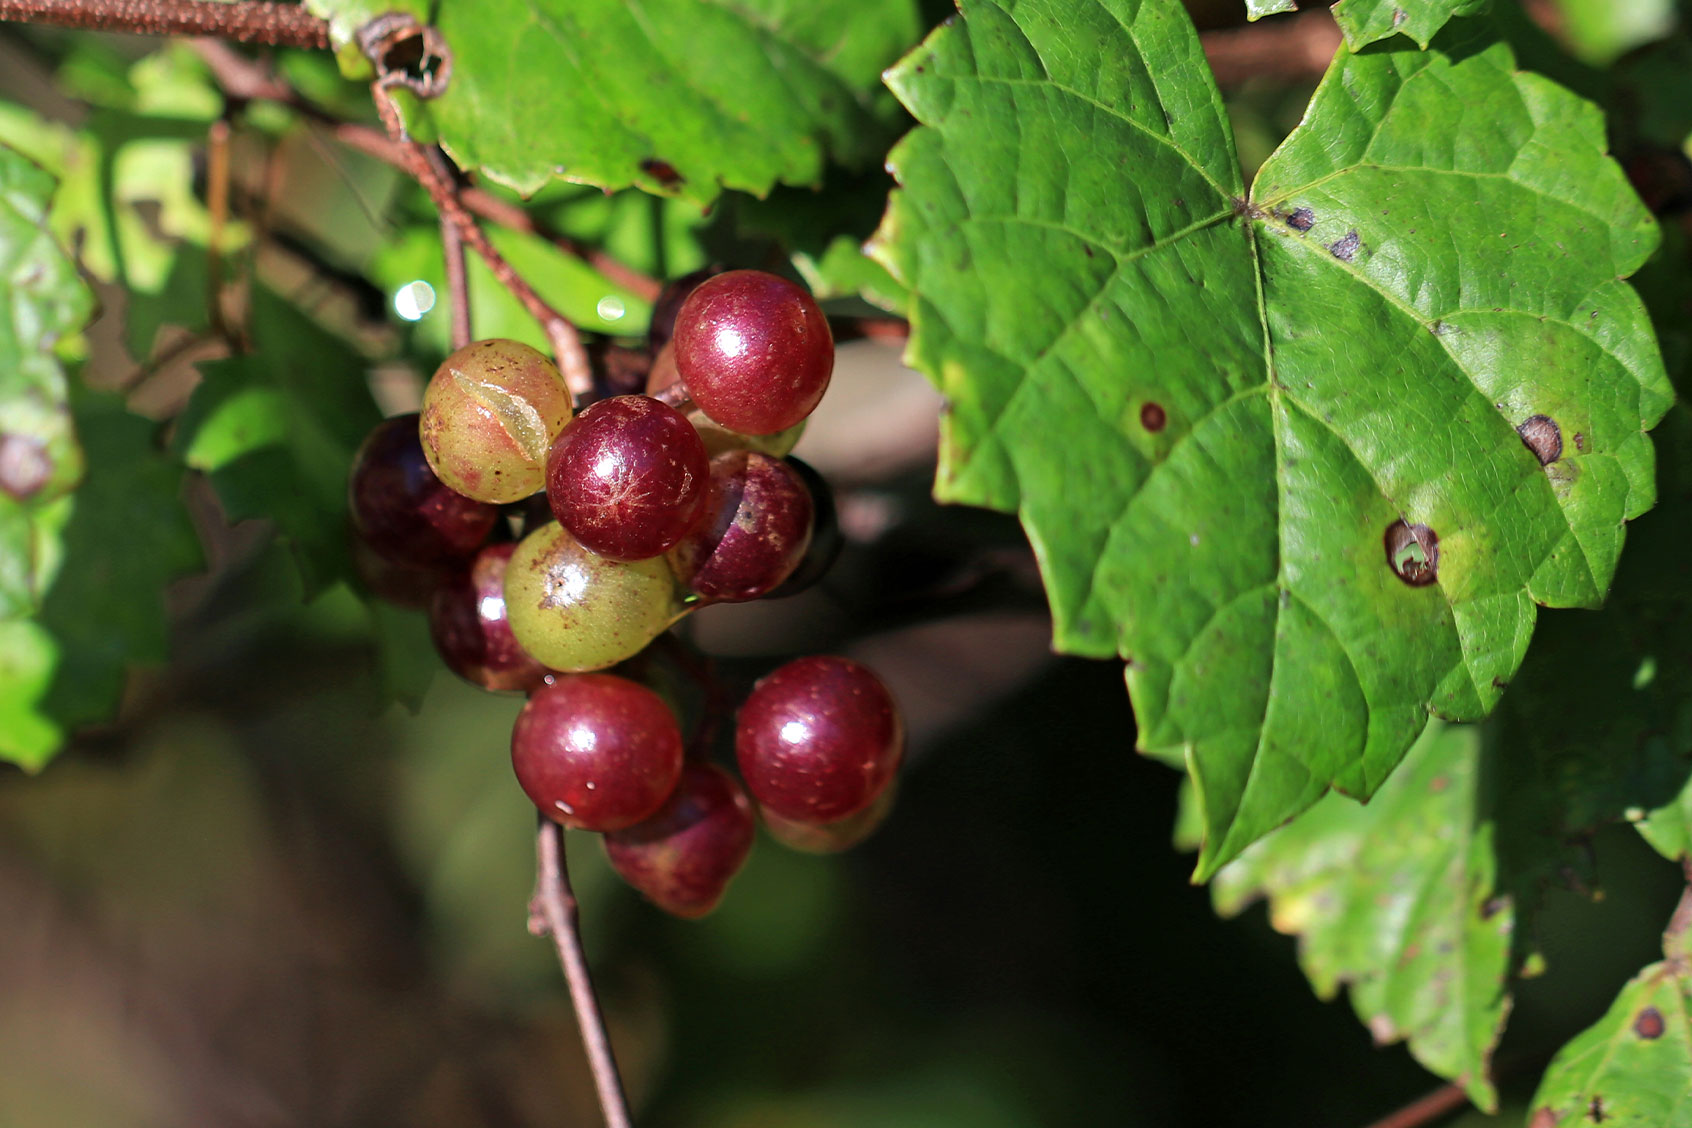 Meet muscadines, the native grapes of the southern U.S.